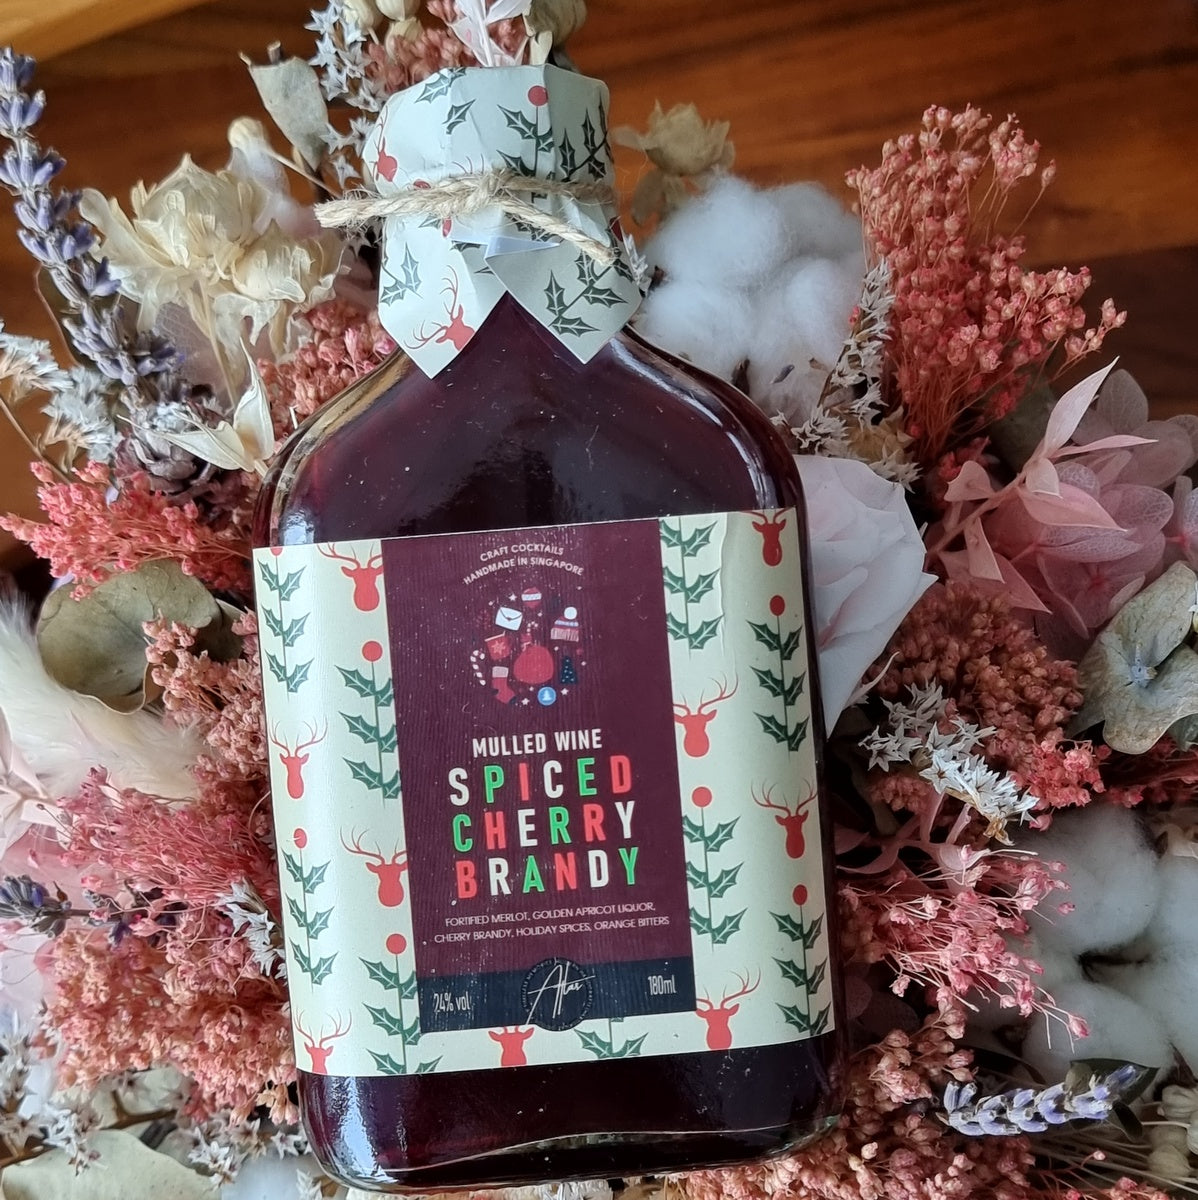 Mulled Atlas Handcrafted Wine Brandy Spiced – Cherry